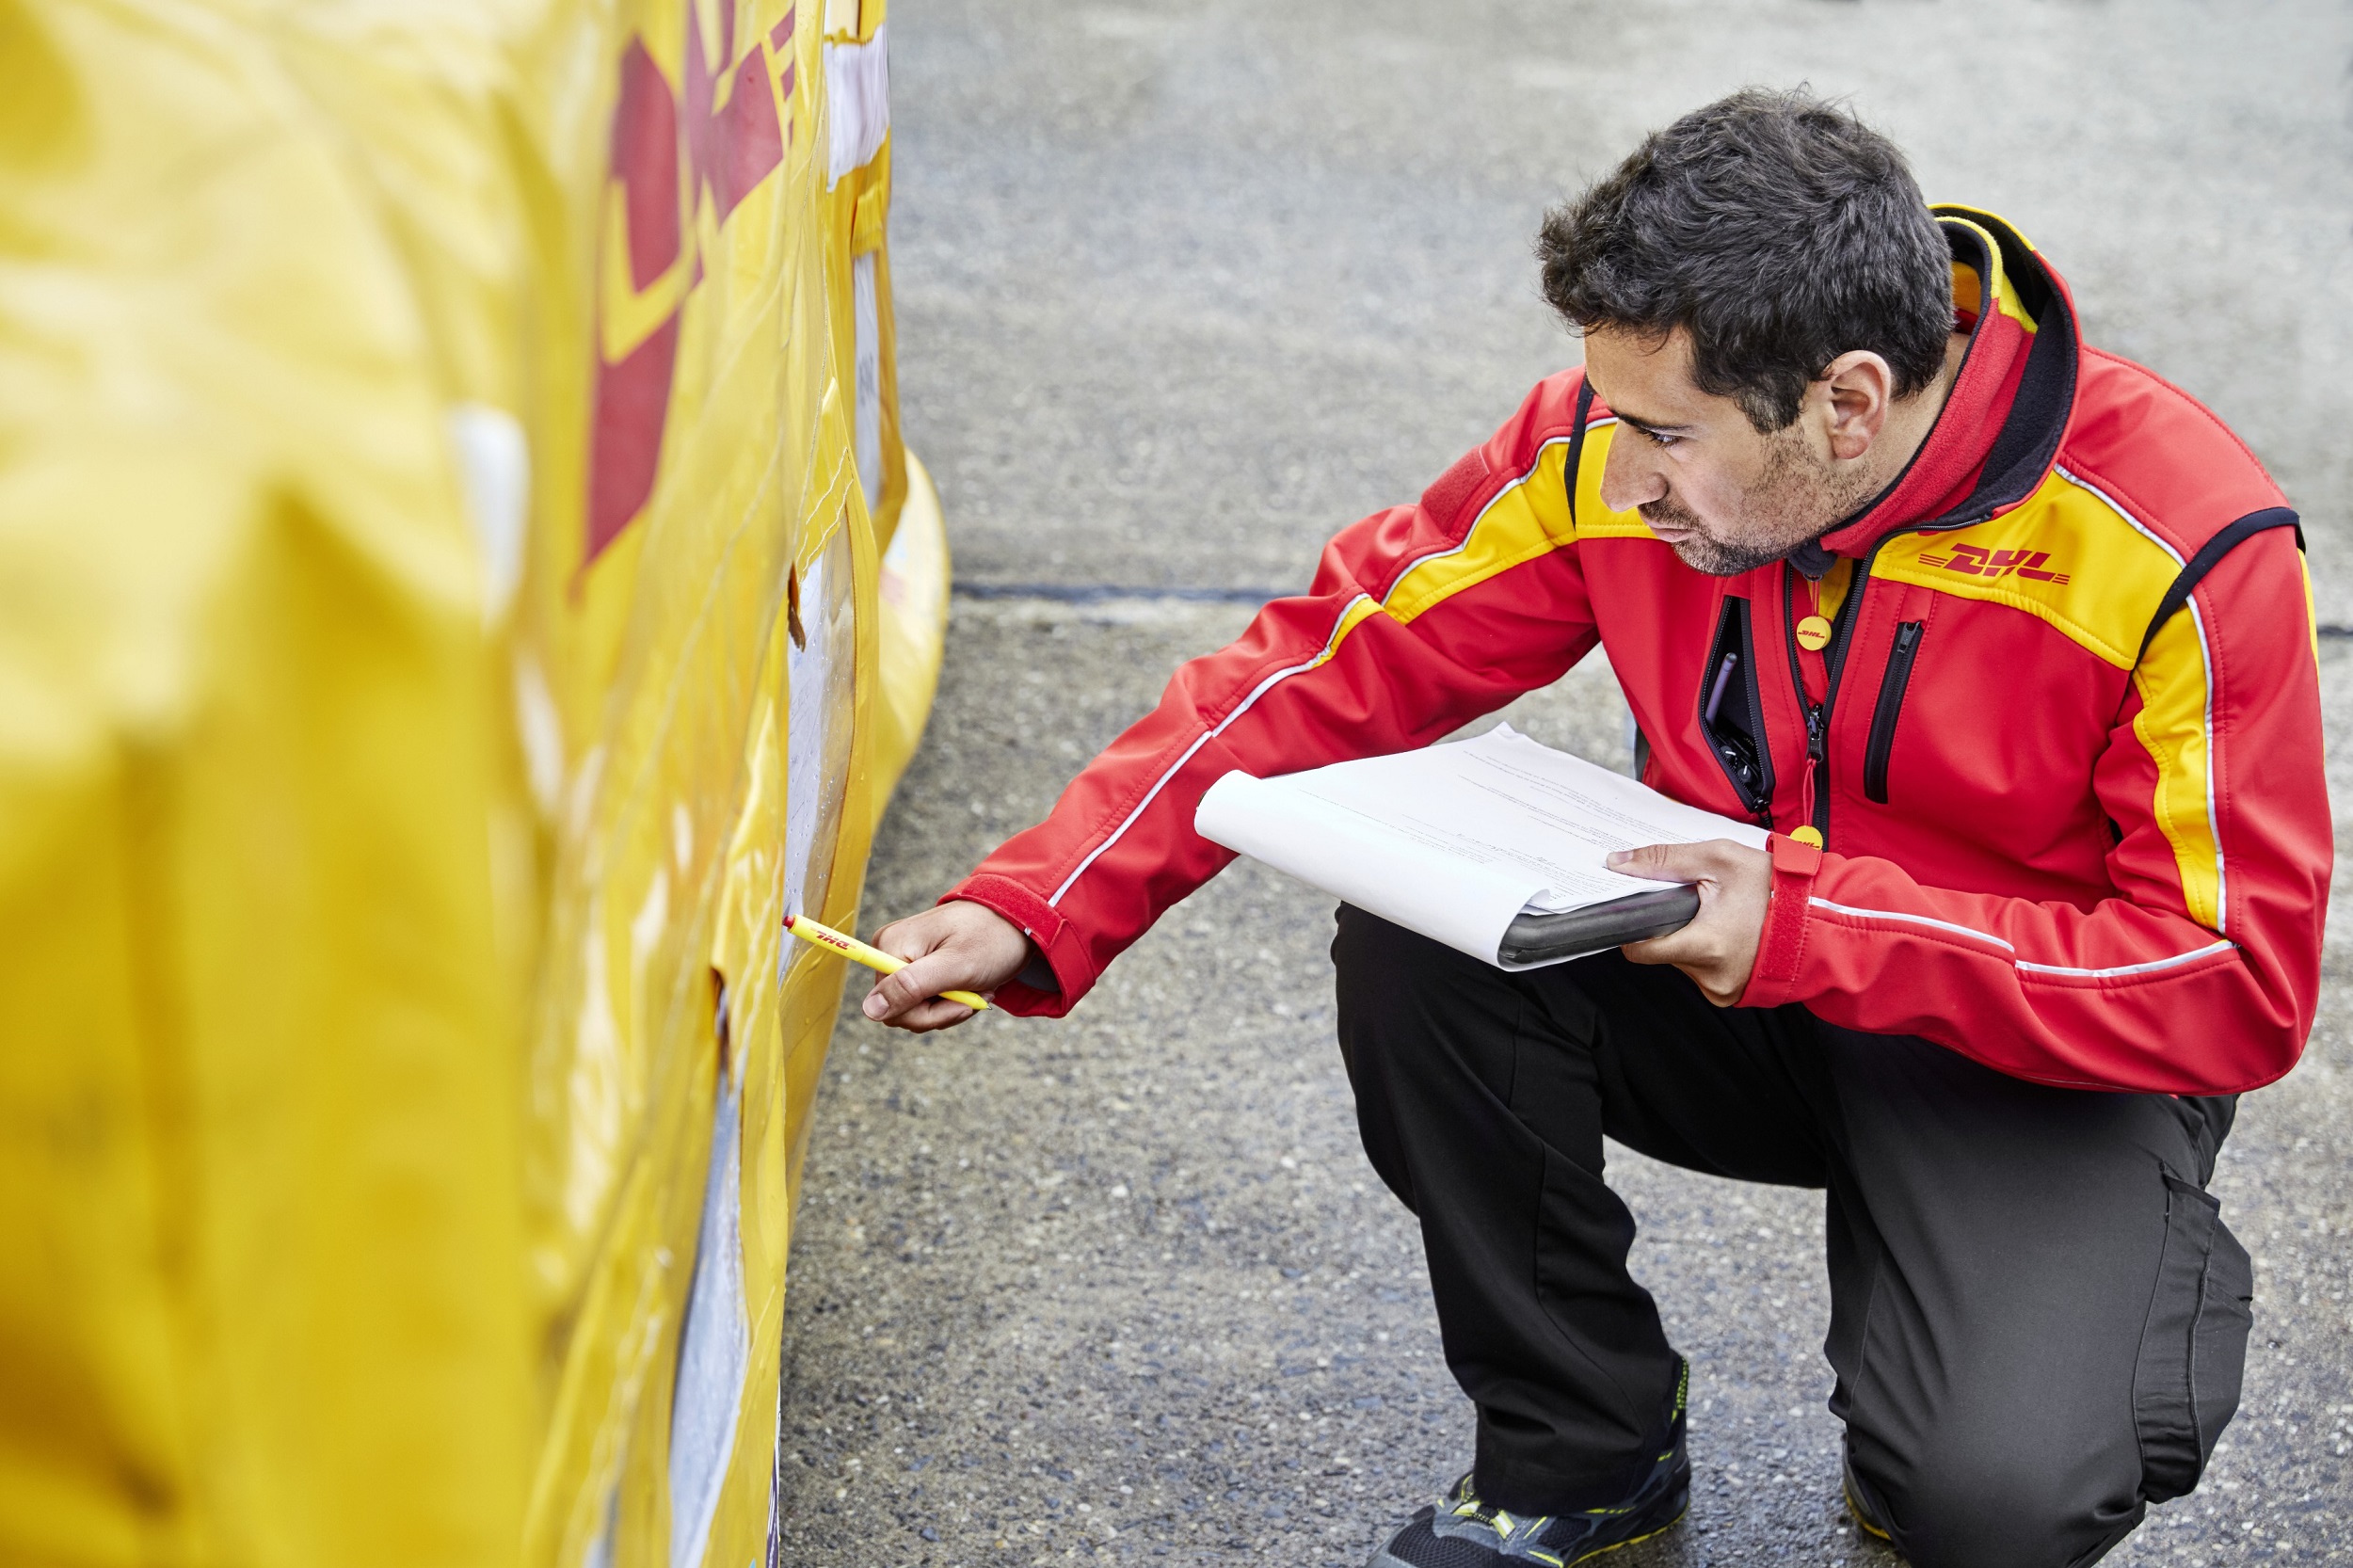 DHL Global Forwarding ships COVID-19 vaccines weekly as New Zealand rolls out vaccination program